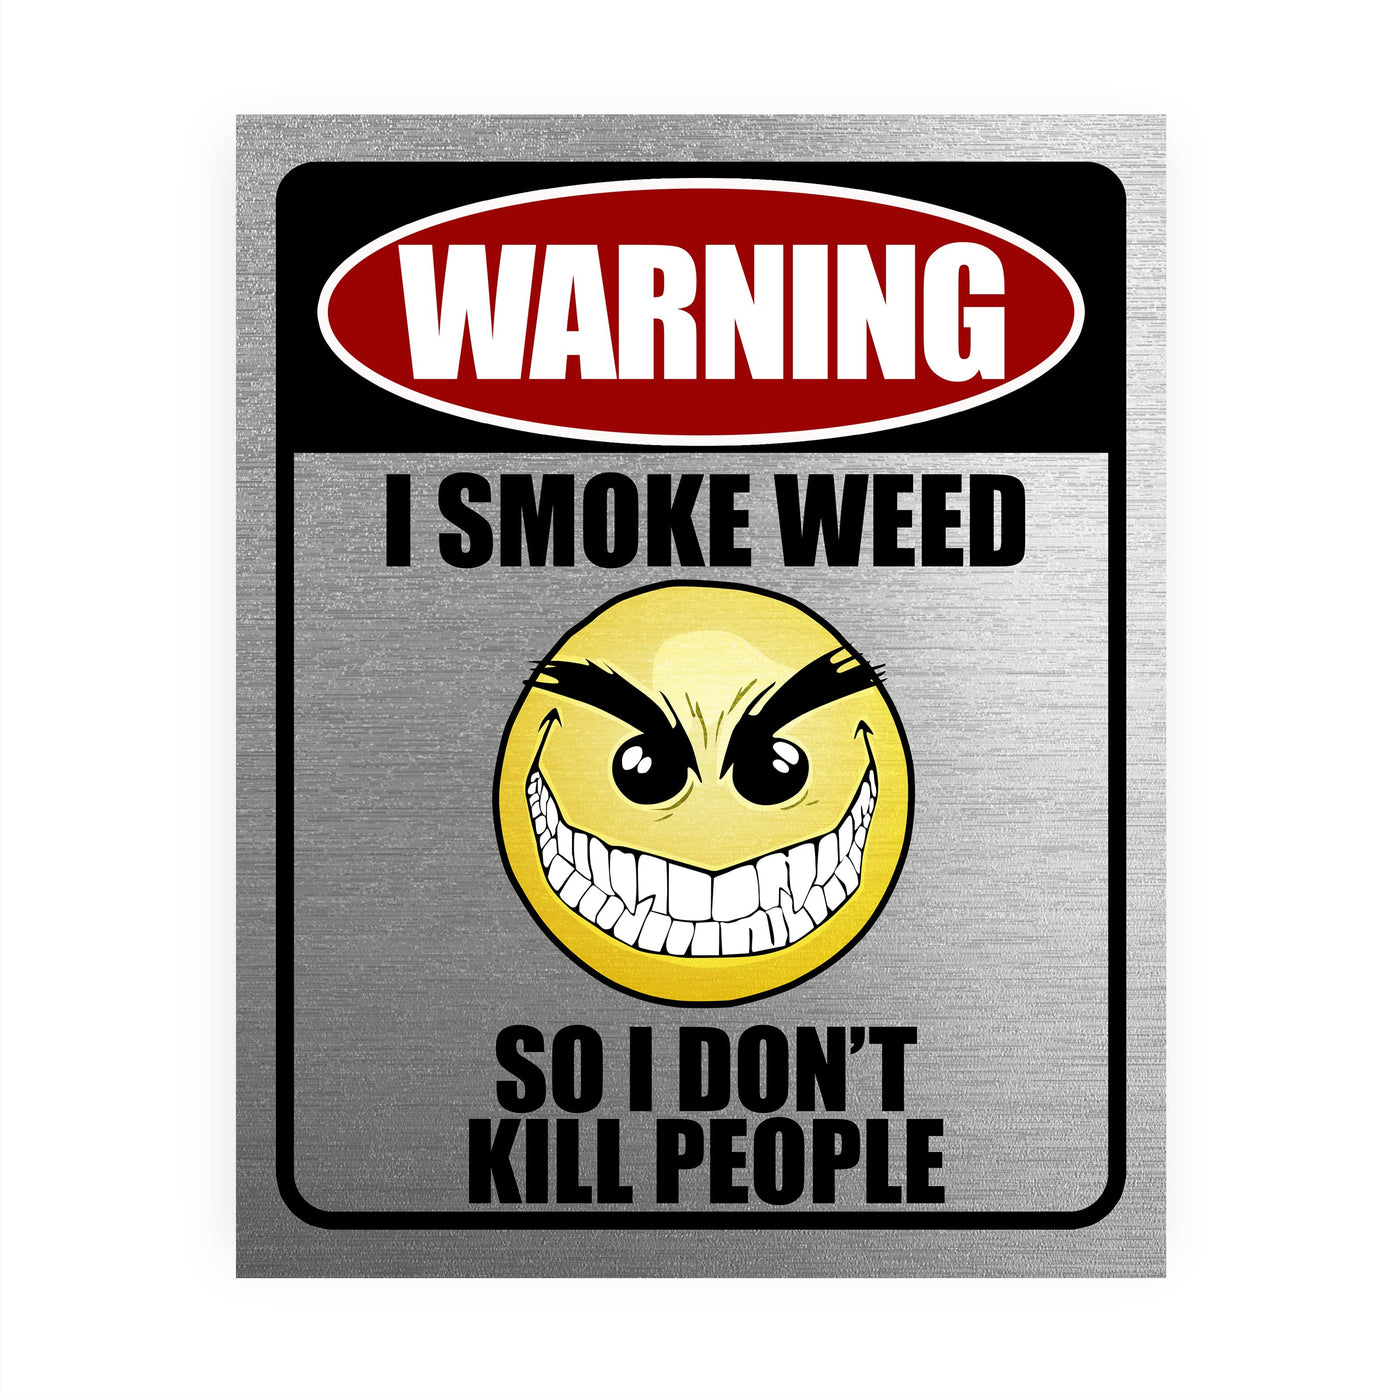 Warning-I Smoke Weed Funny Wall Art -8 x 10" Sarcastic Replica Sign Print -Ready to Frame. Humorous Decoration for Home-Office-Bar-Shop-Man Cave Decor. Fun Novelty Gift! Printed on Photo Paper.